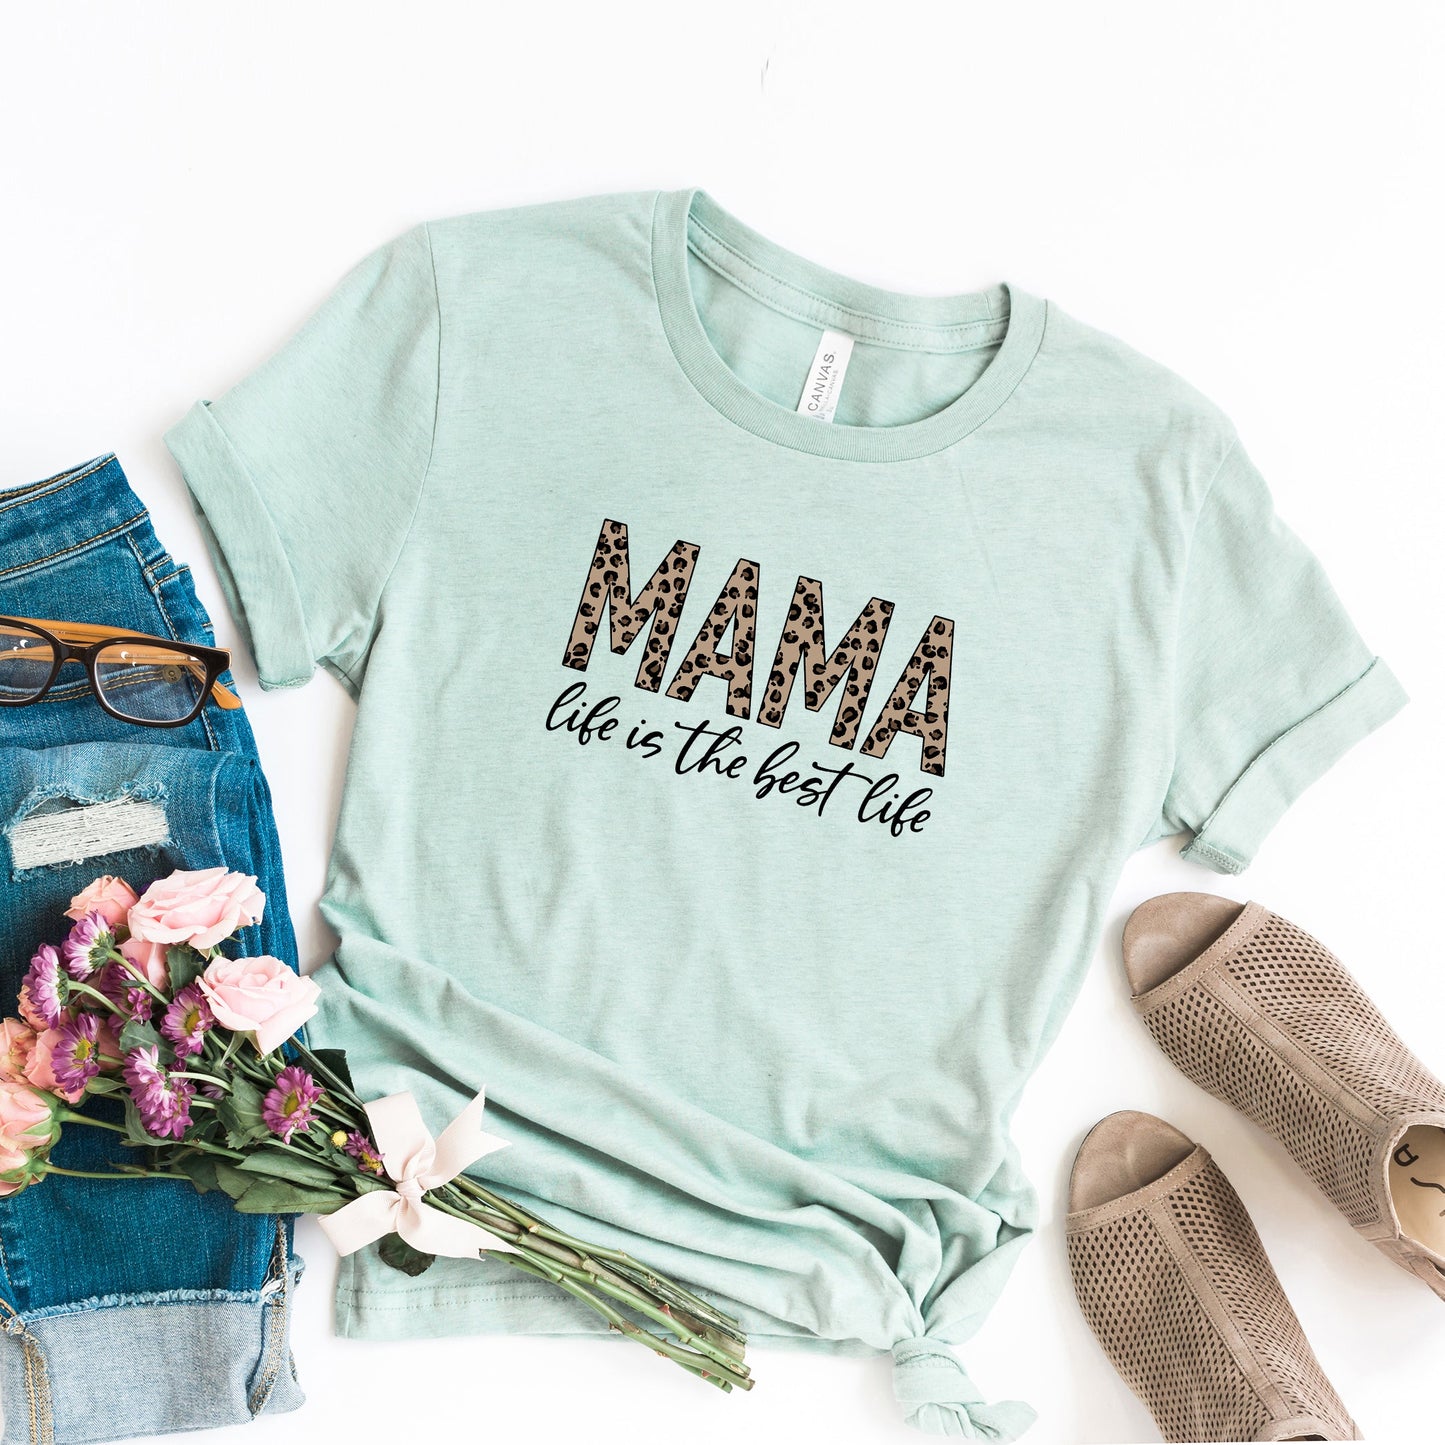 Clearance Mama Life Is The Best Life Leopard | Short Sleeve Tee